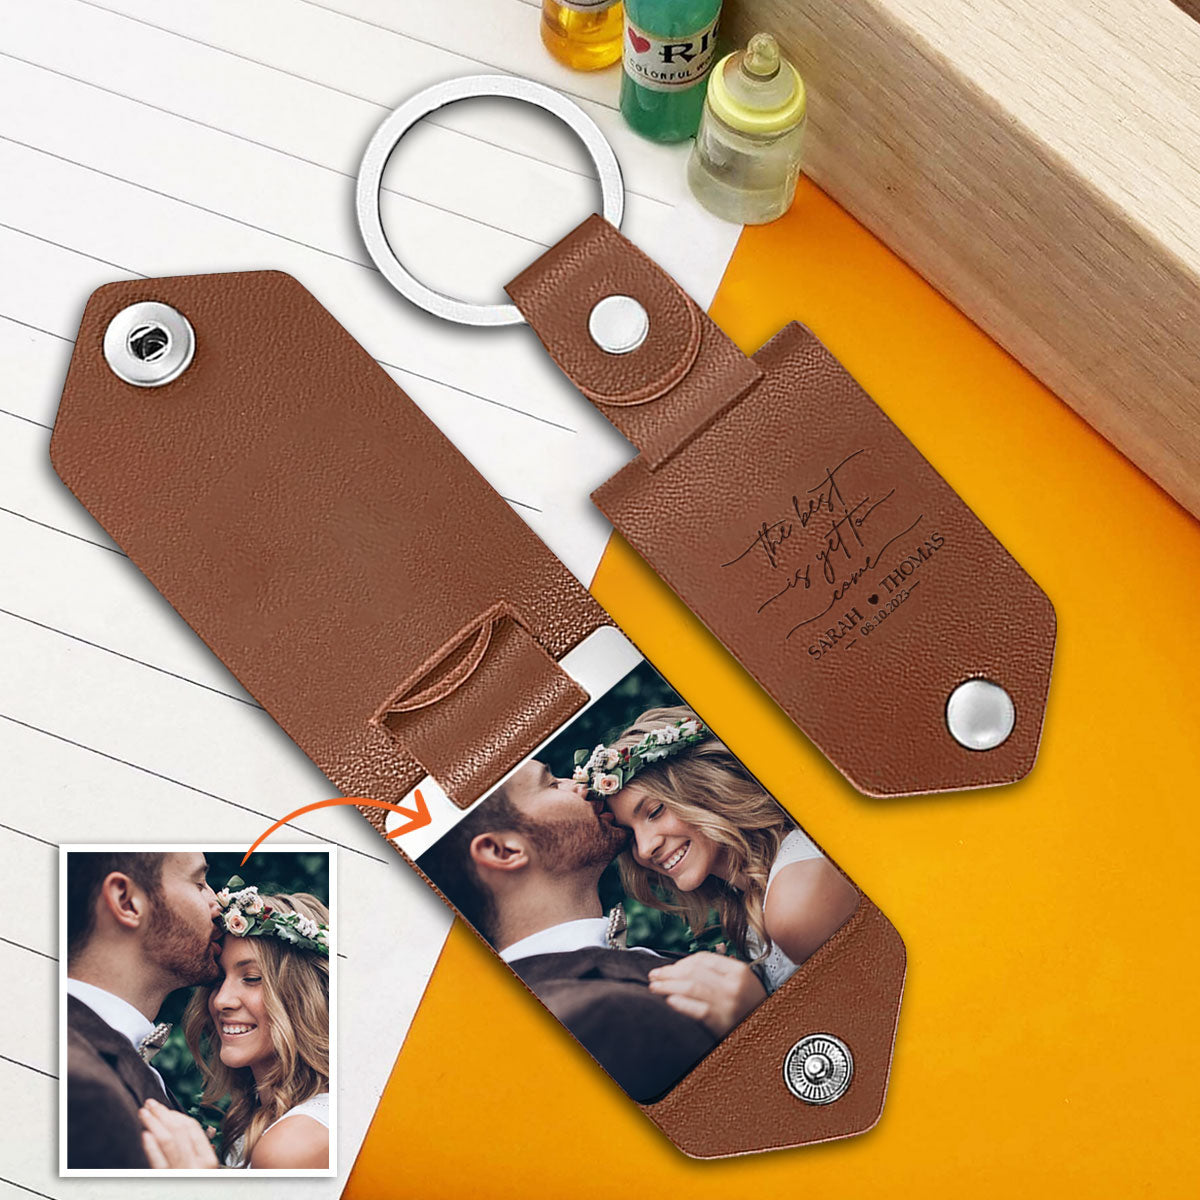 The Best Is Yet To Come - wedding gift for husband, wife, boyfriend, girlfriend - Personalized Leather Photo Keychain